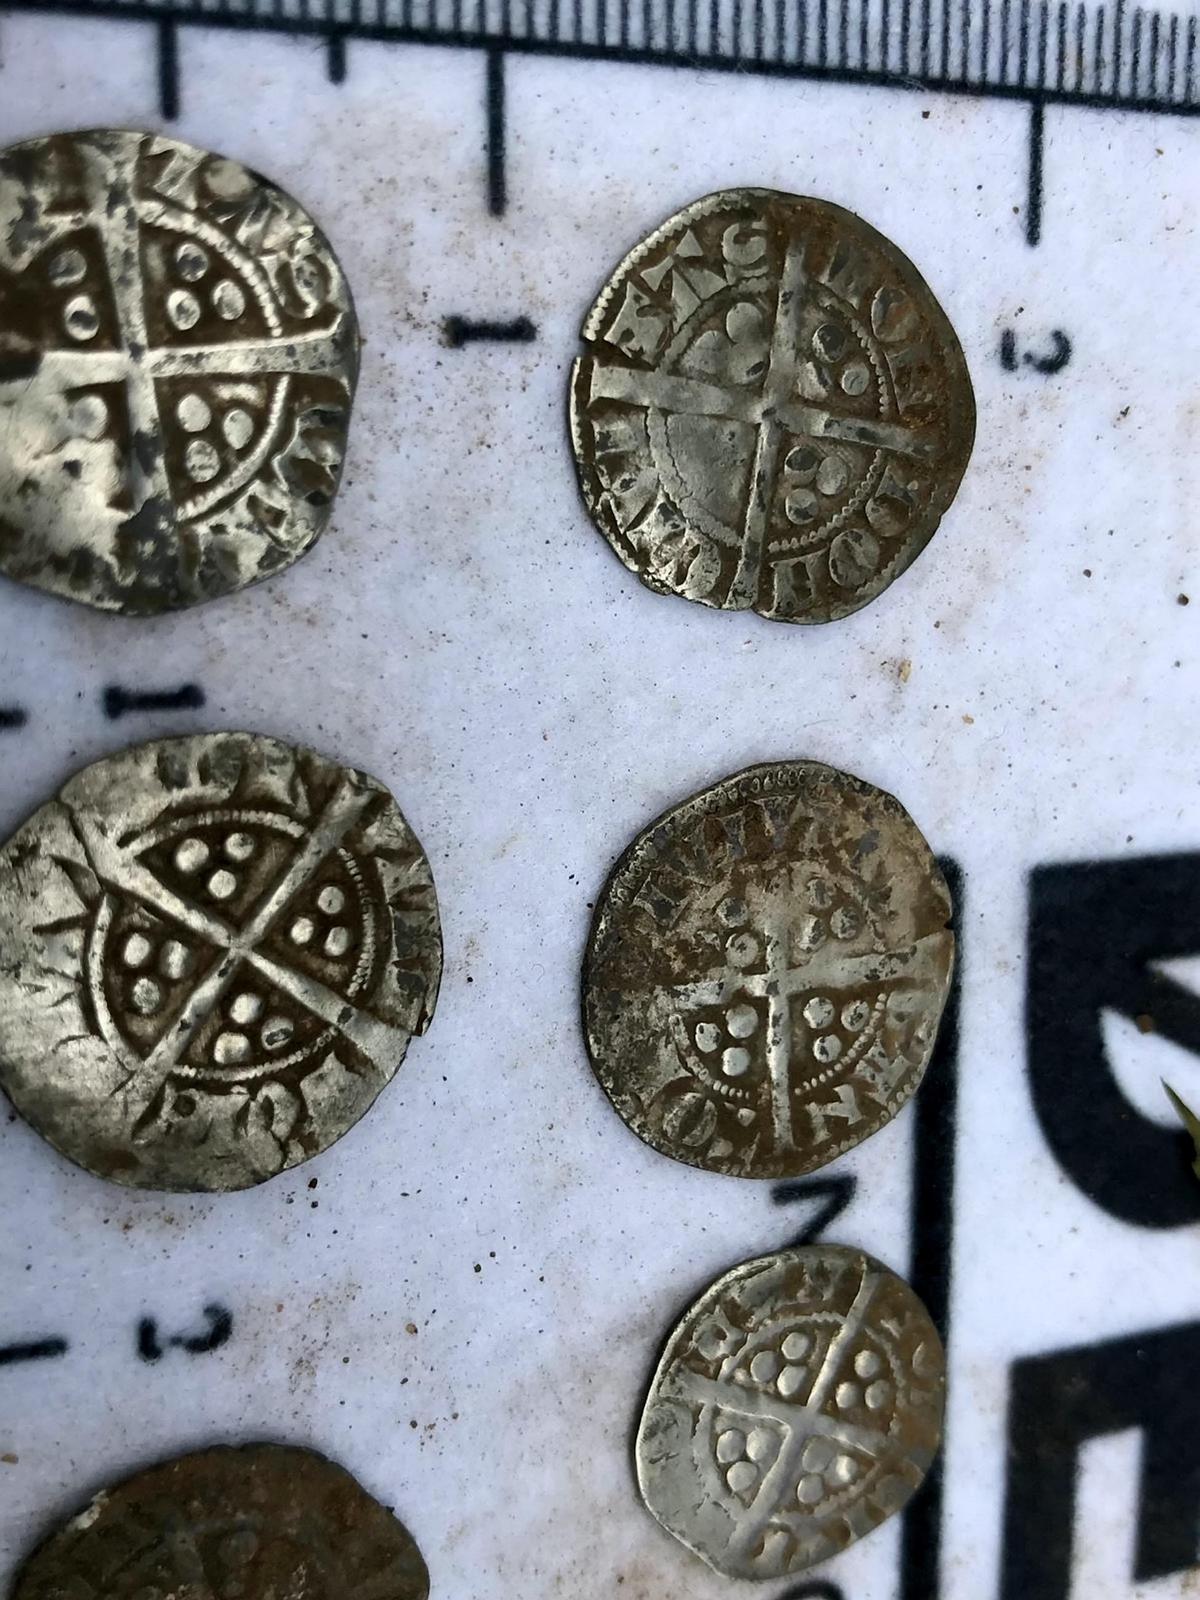 A number of silver pennies found within the hoard near Hambleden, Buckinghamshire. (SWNS)